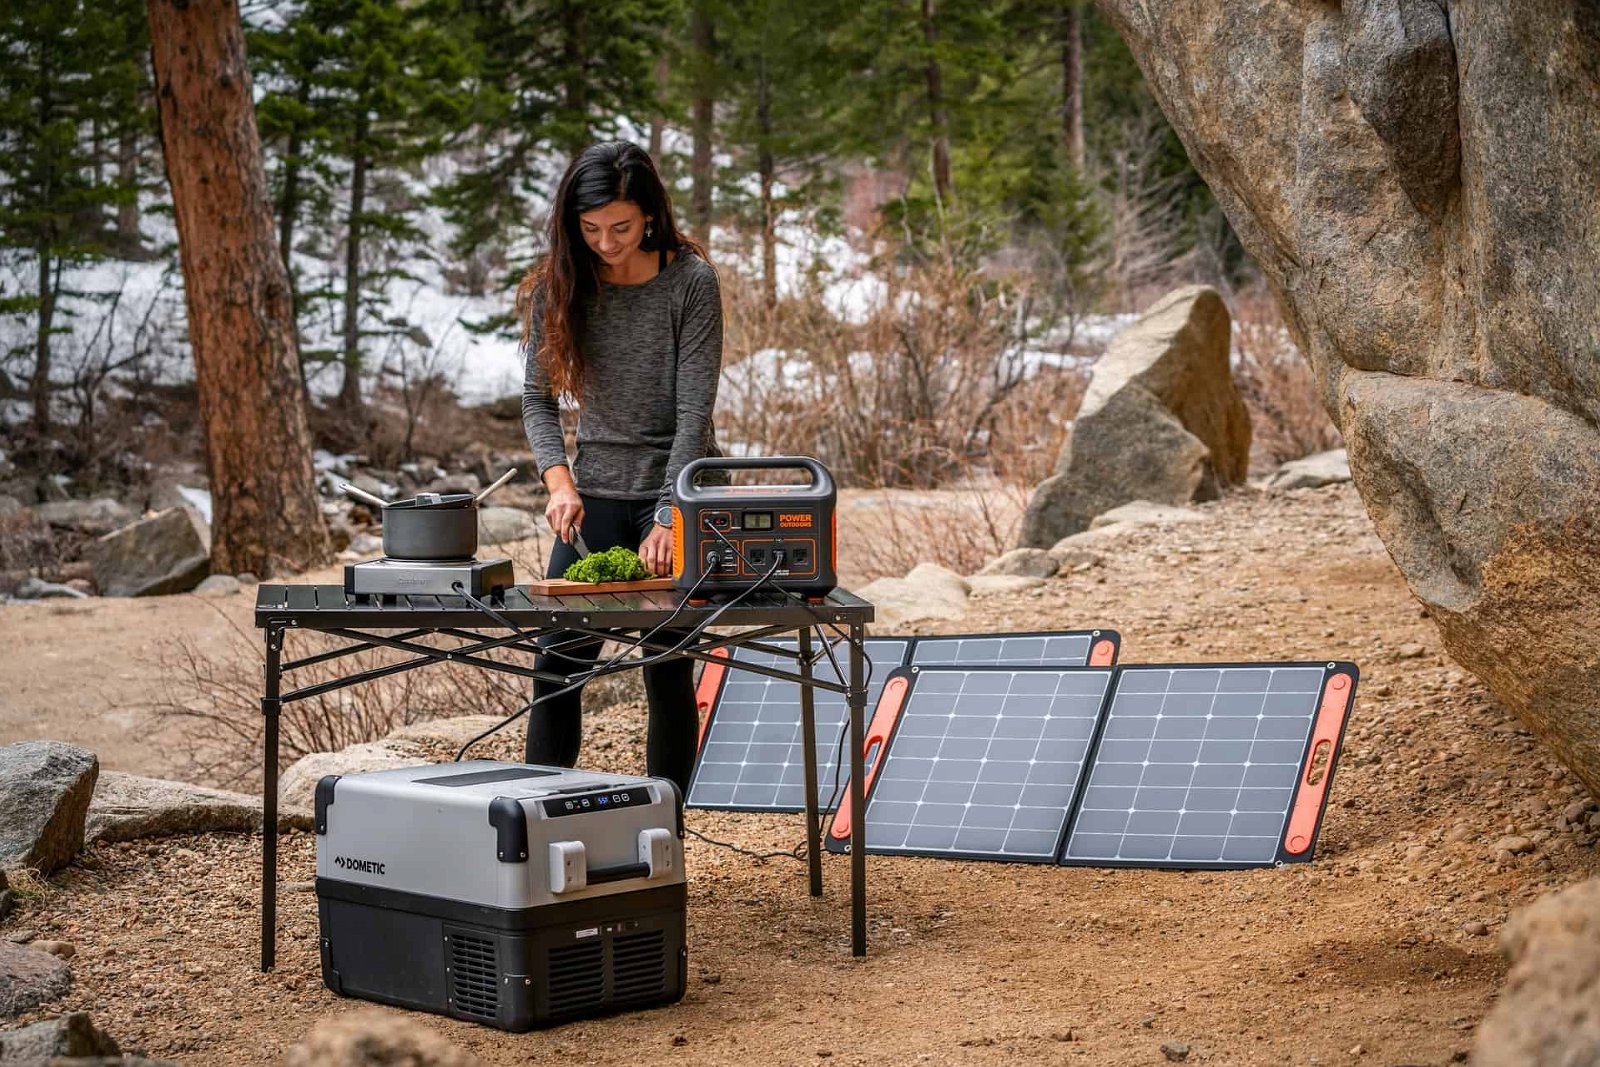 How to Buy a Home Solar Generator: A Simple Guide for First-Time Buyers